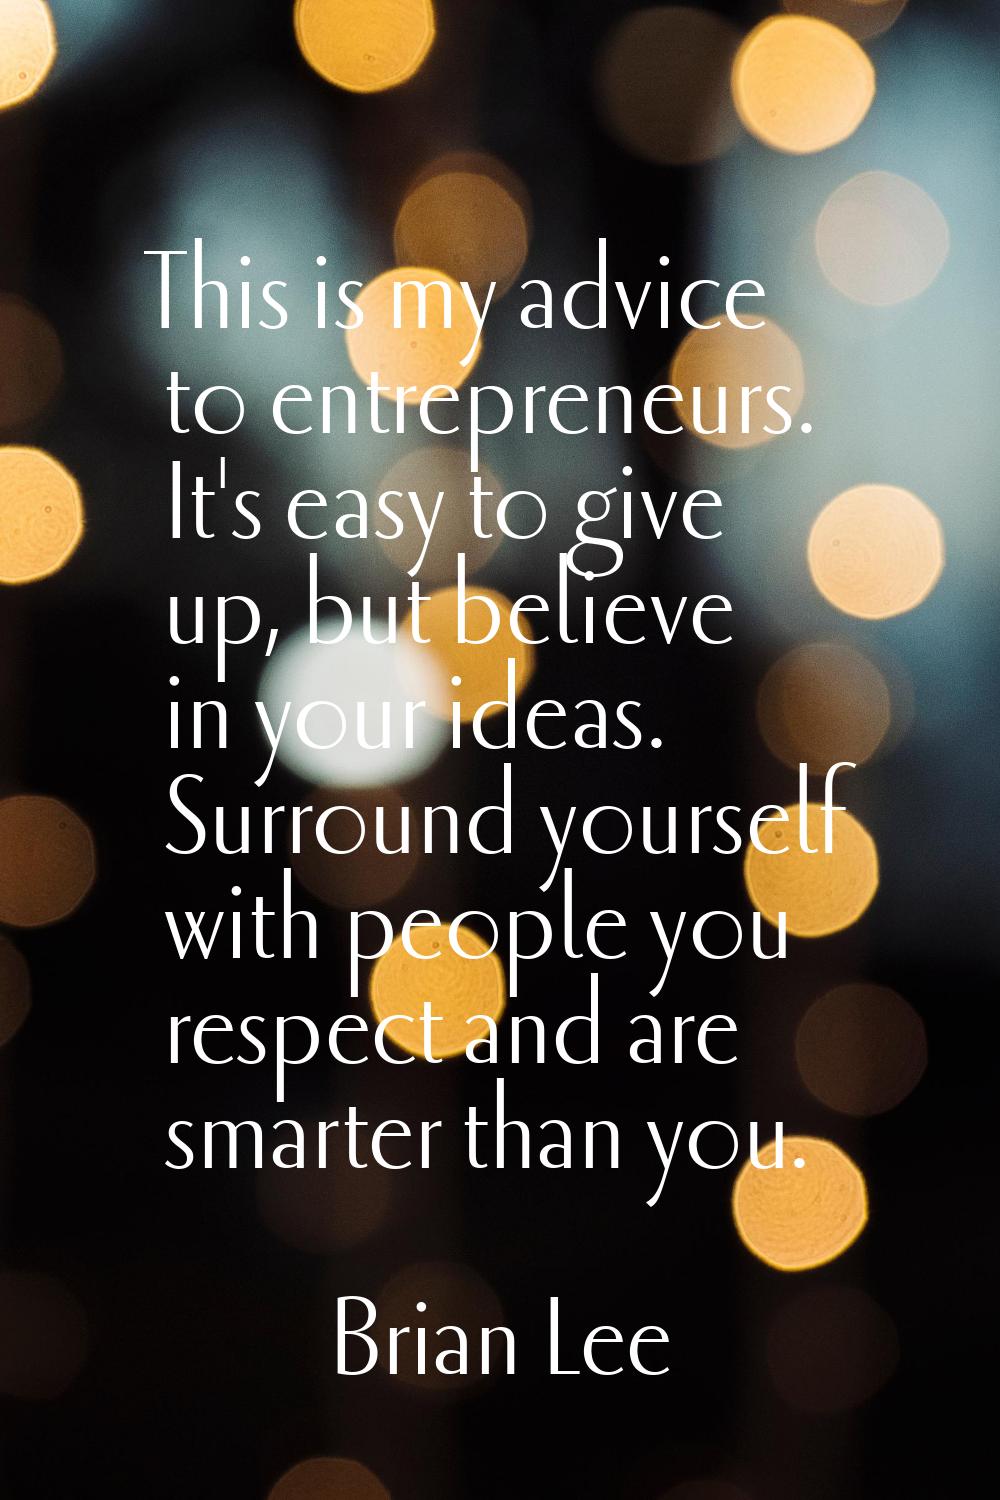 This is my advice to entrepreneurs. It's easy to give up, but believe in your ideas. Surround yours